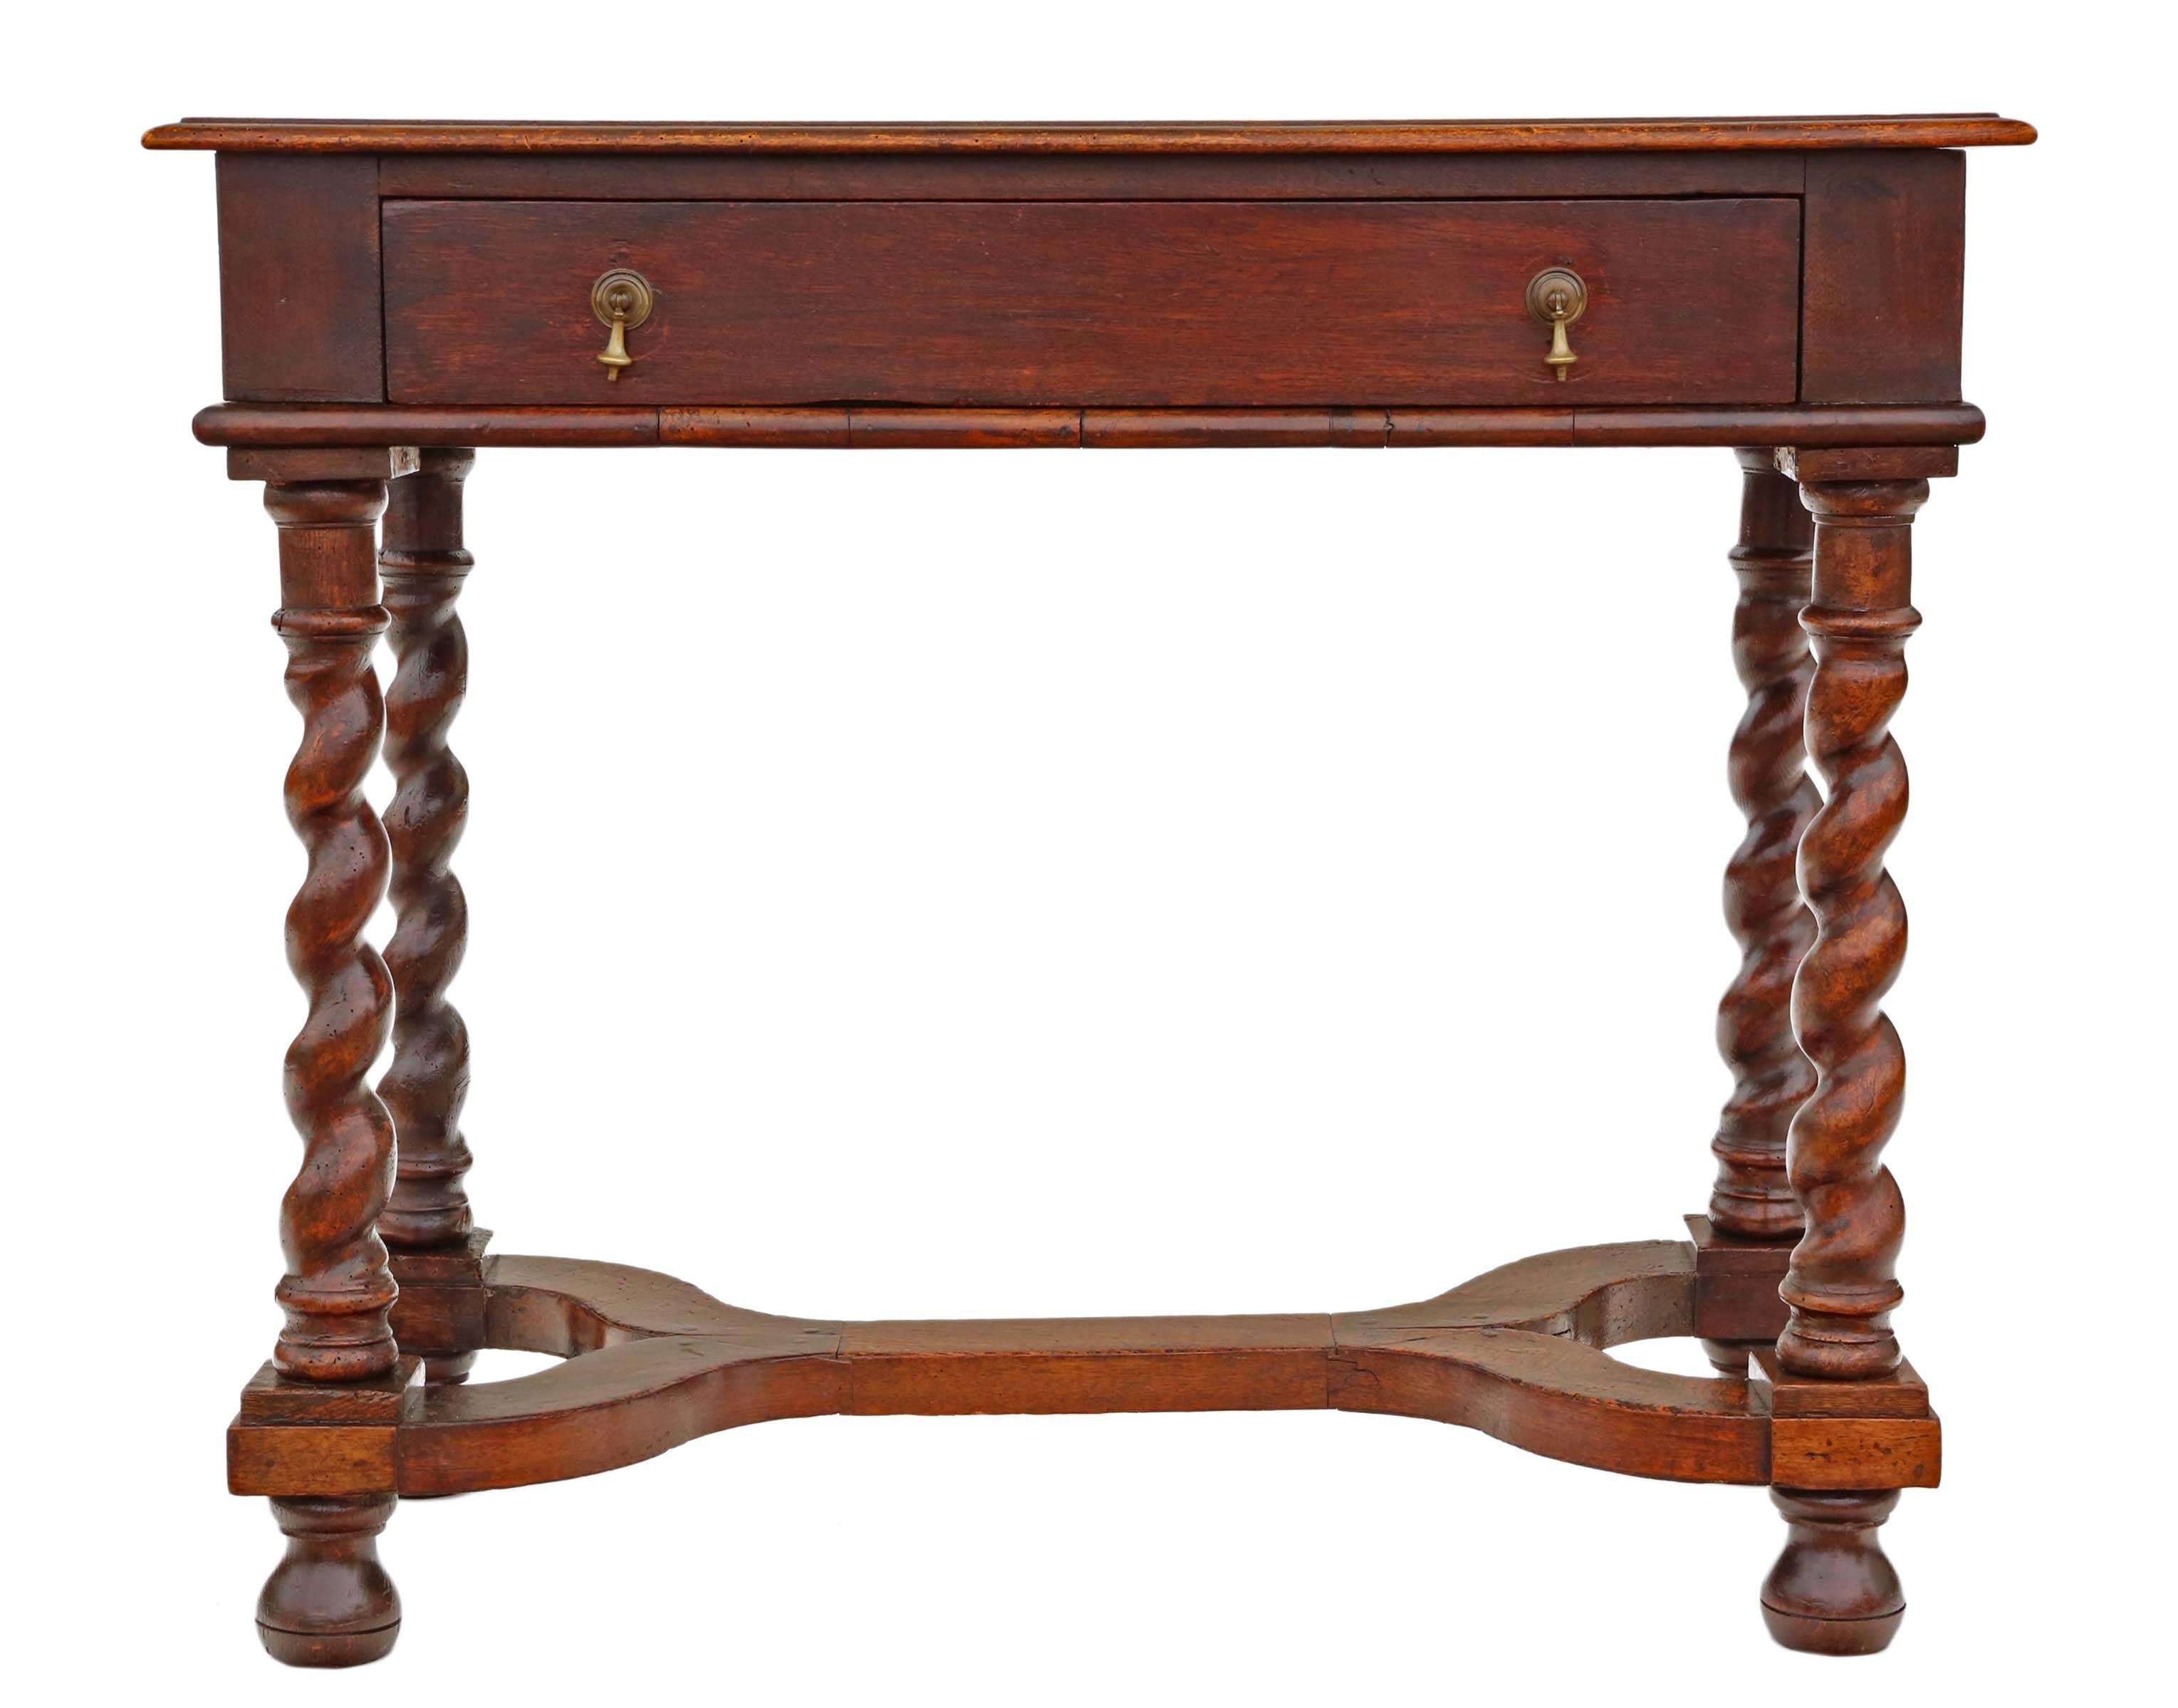 Antique Georgian Walnut and Fruitwood Desk Writing Side Table, 18th Century In Good Condition For Sale In Wisbech, Walton Wisbech